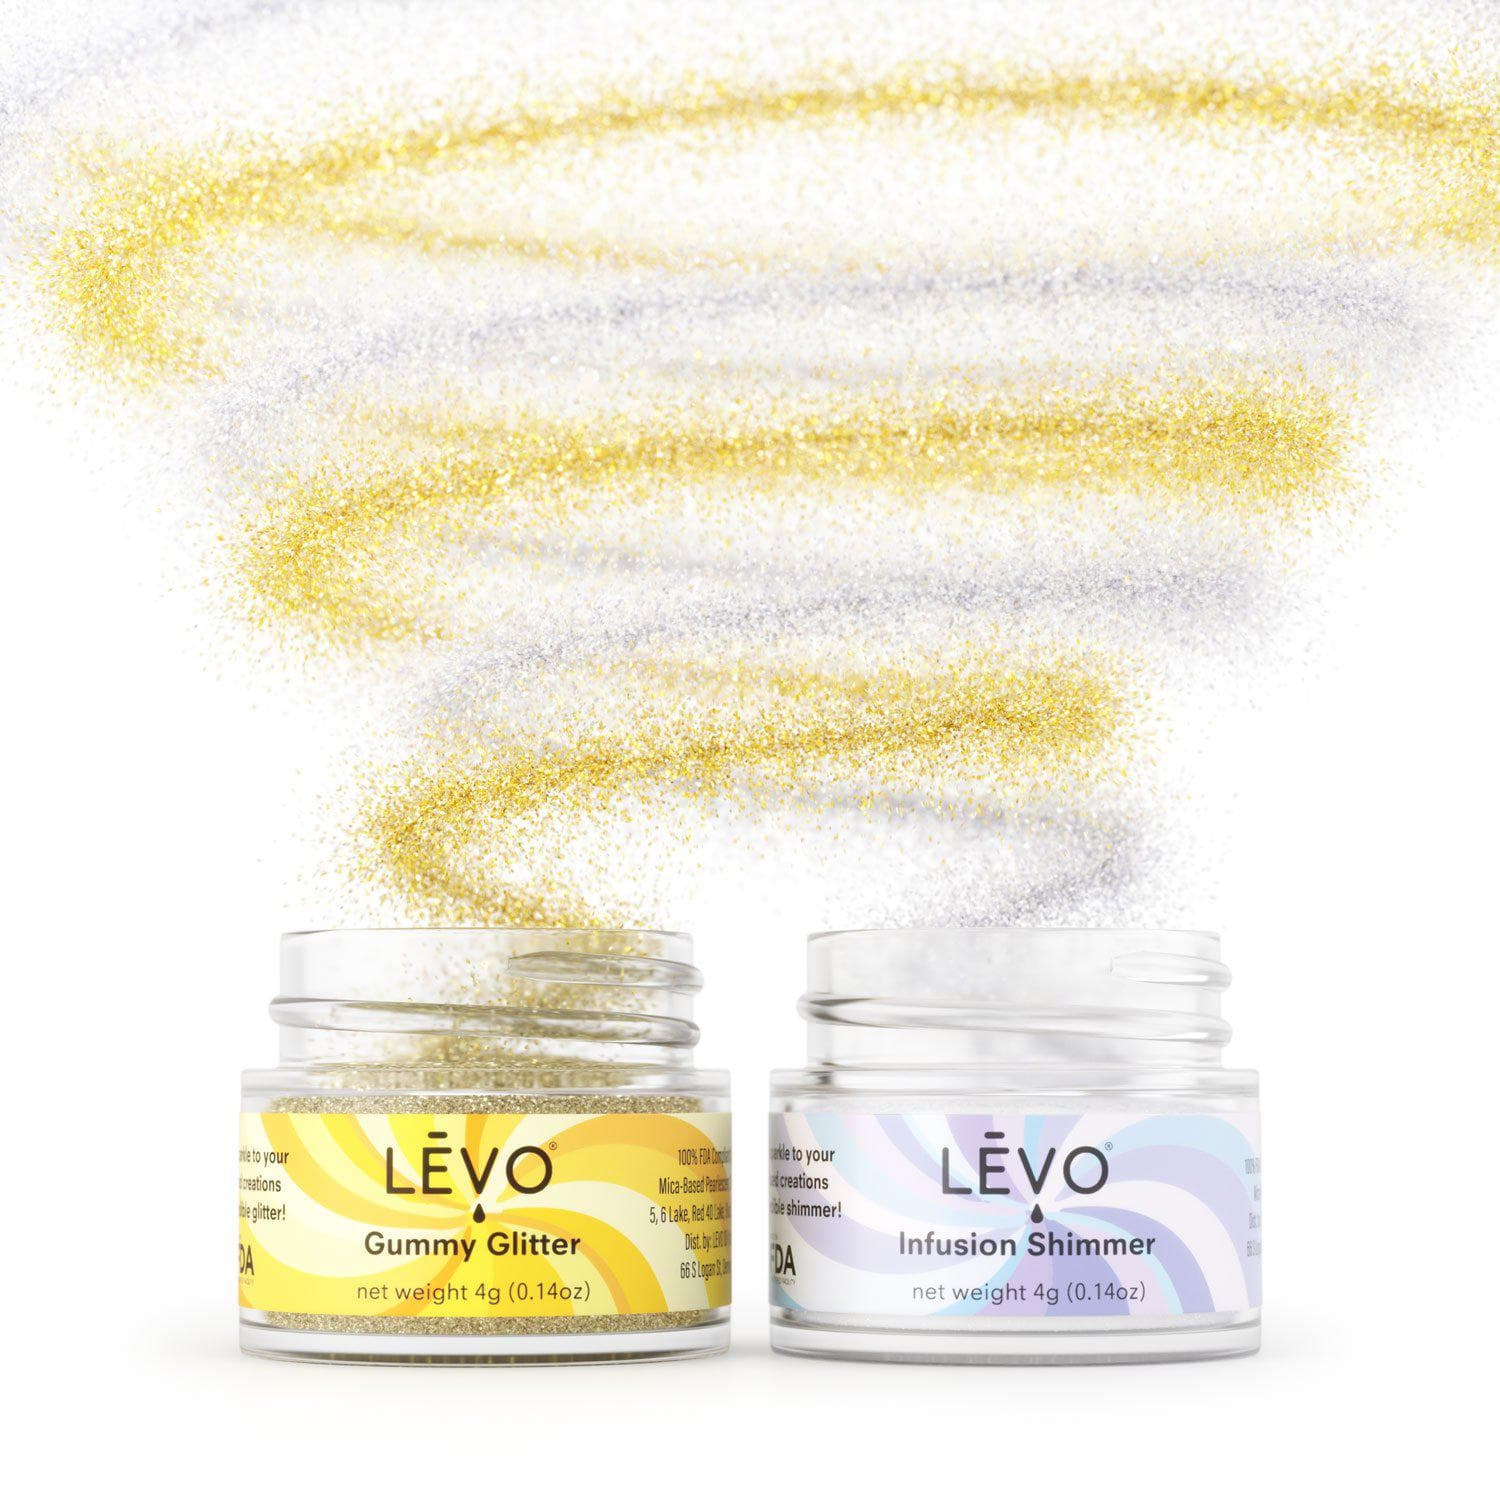 LEVO ✨NEW✨ Gummy Candy Mixer kit // Honest Testing Review 